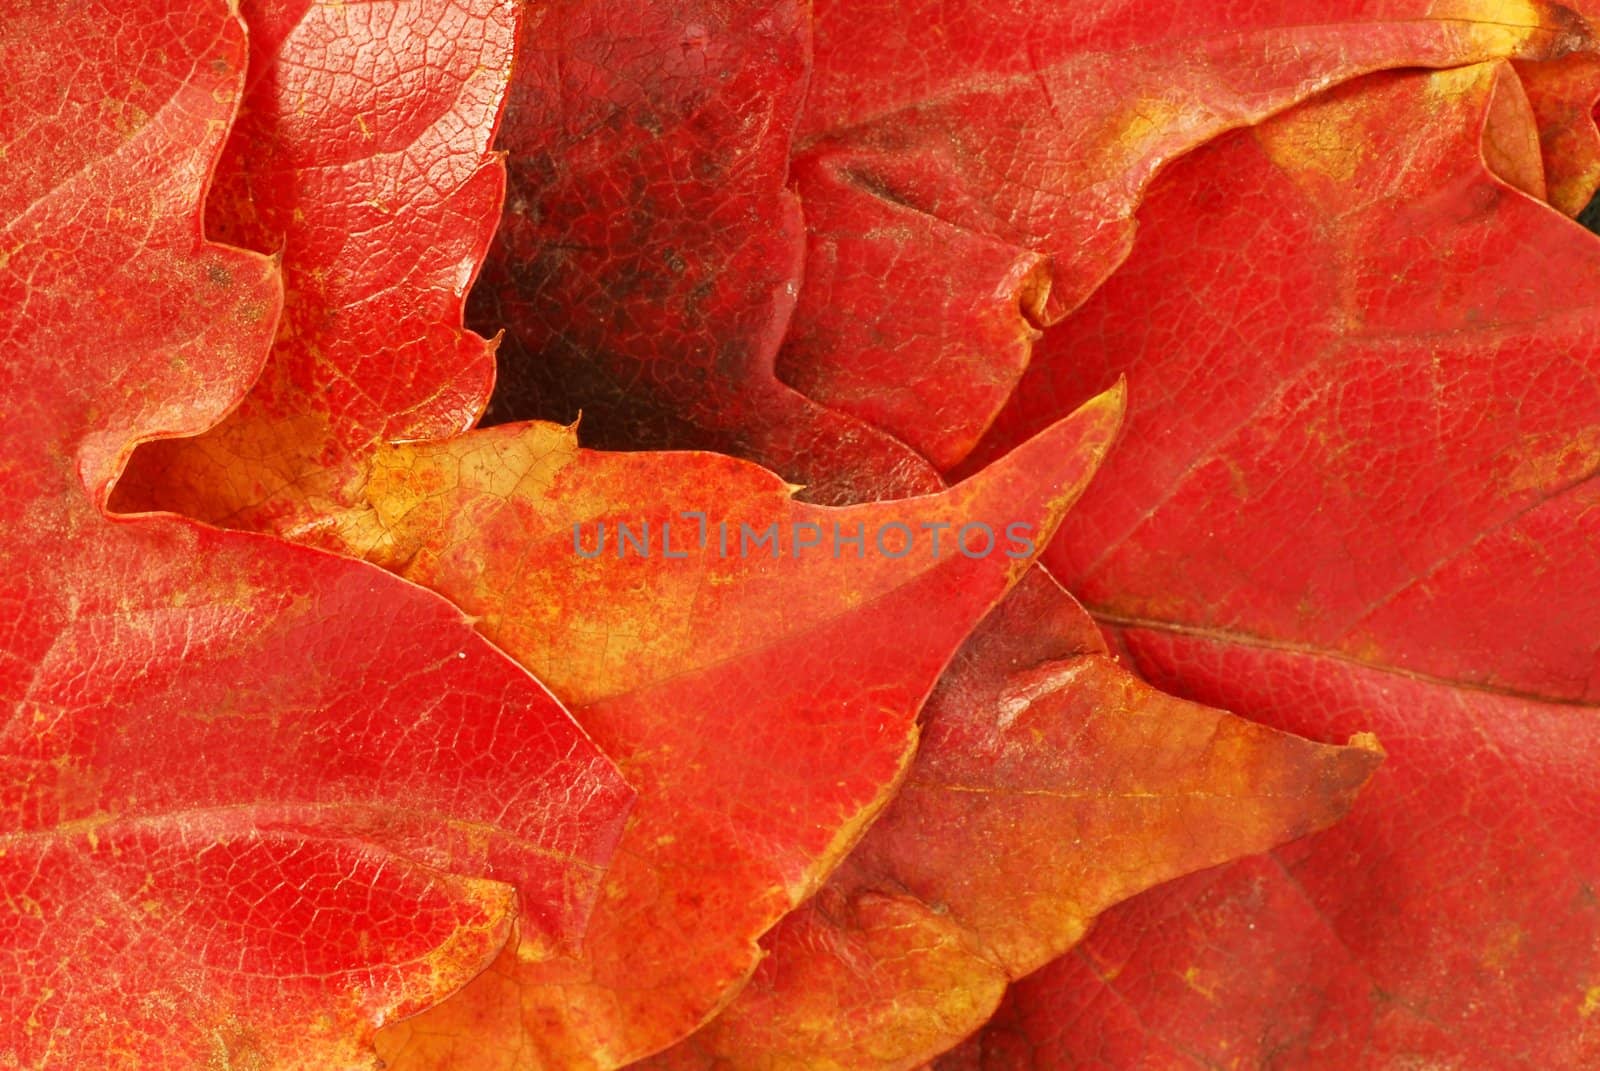 Autumn leaves by simply